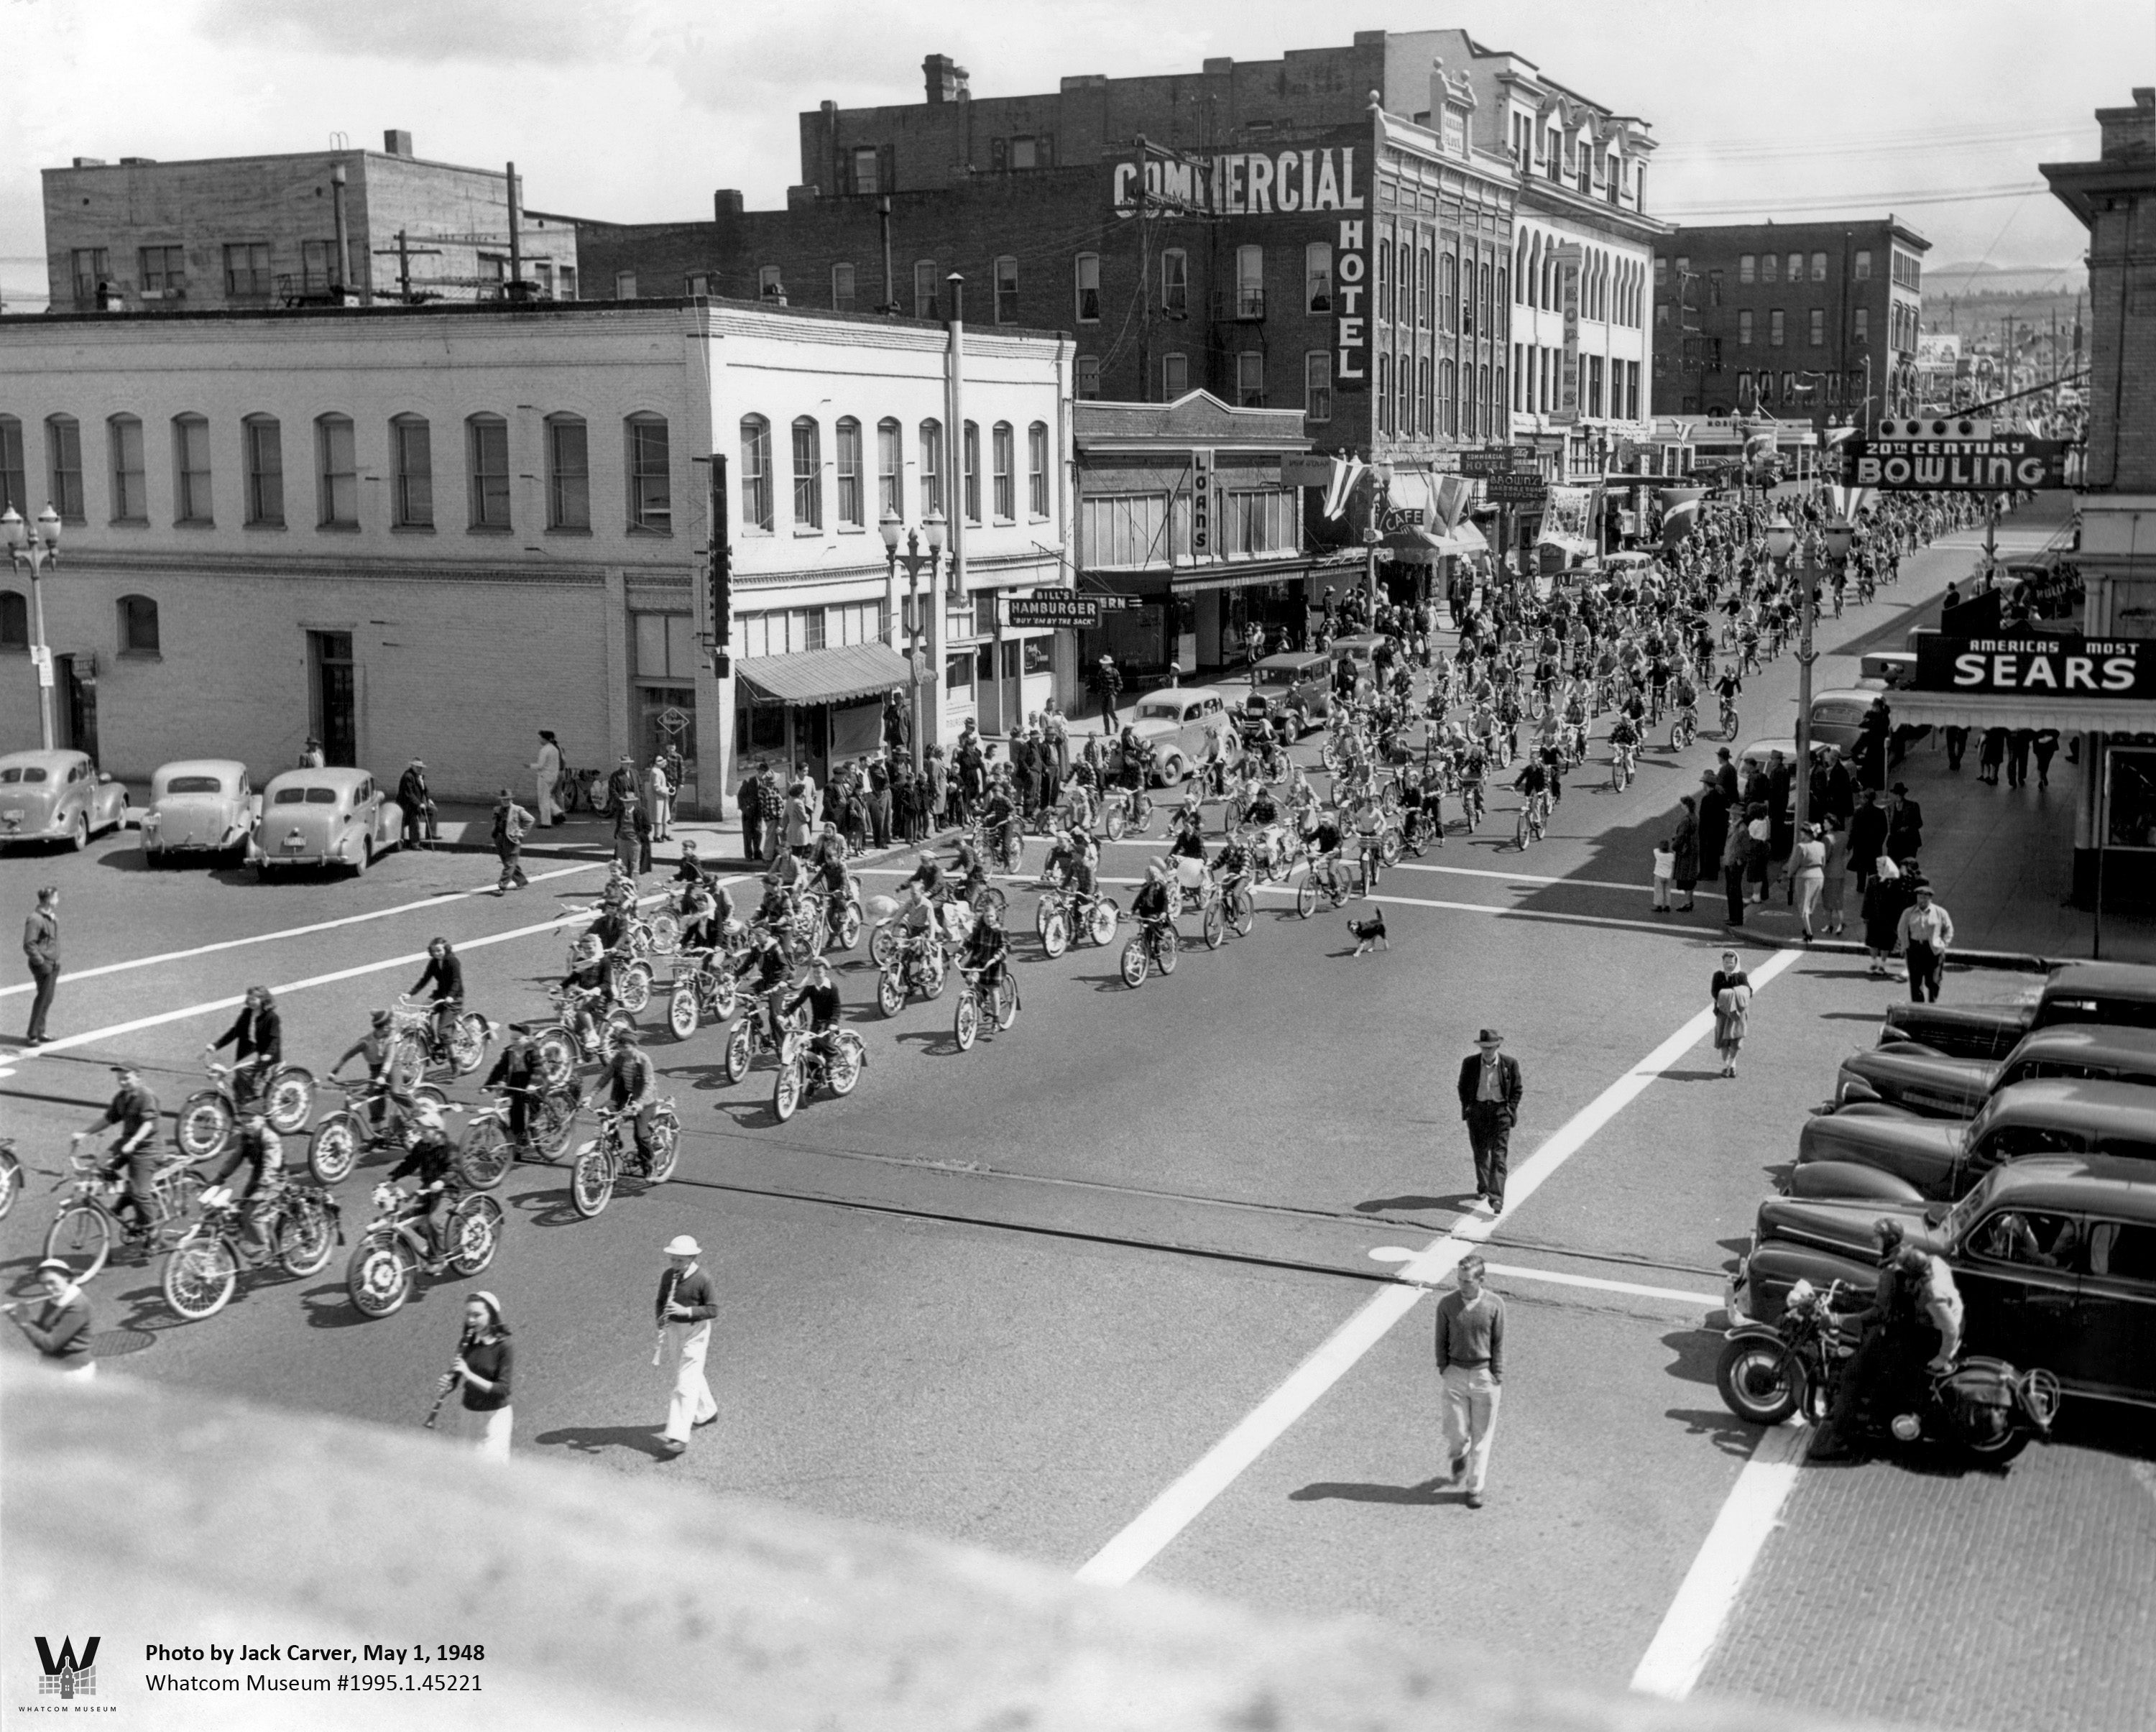 Historic photo of many youth on bicycles riding down street